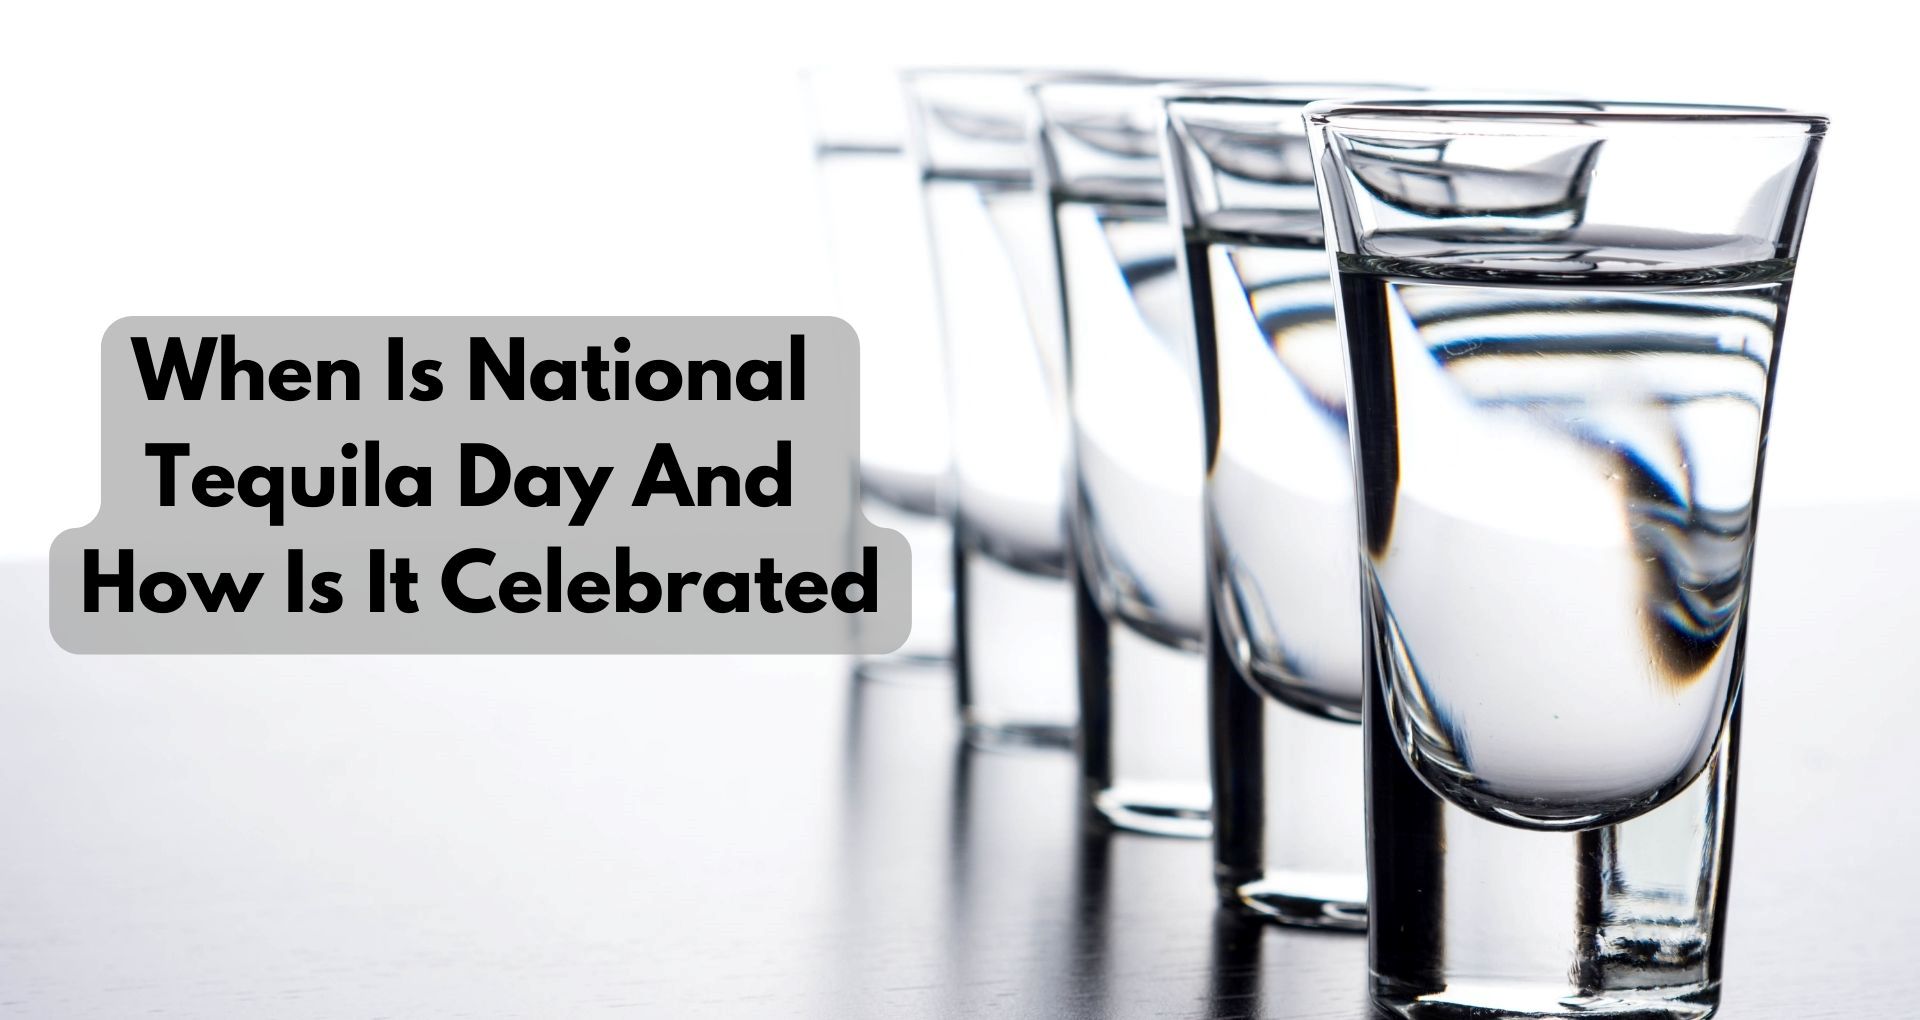 When Is National Tequila Day And How Is It Celebrated?